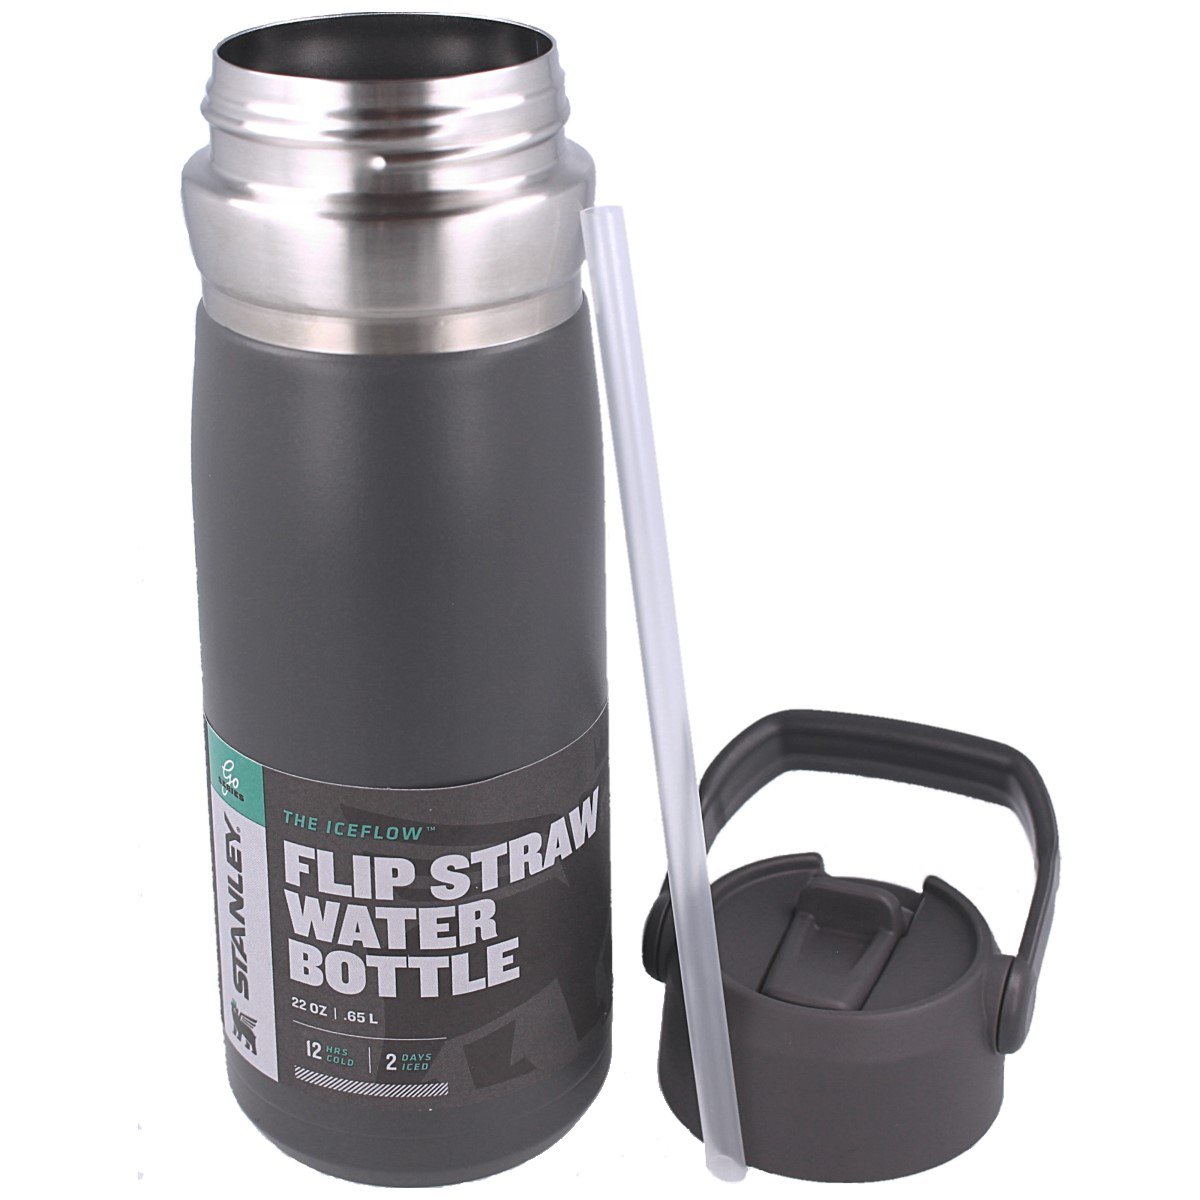 https://sharg.pl/eng_pl_Stanley-Go-IceFlow-Water-Bottle-with-Straw-22oz-65L-Charcoal-10-09697-008-115402_5.jpg